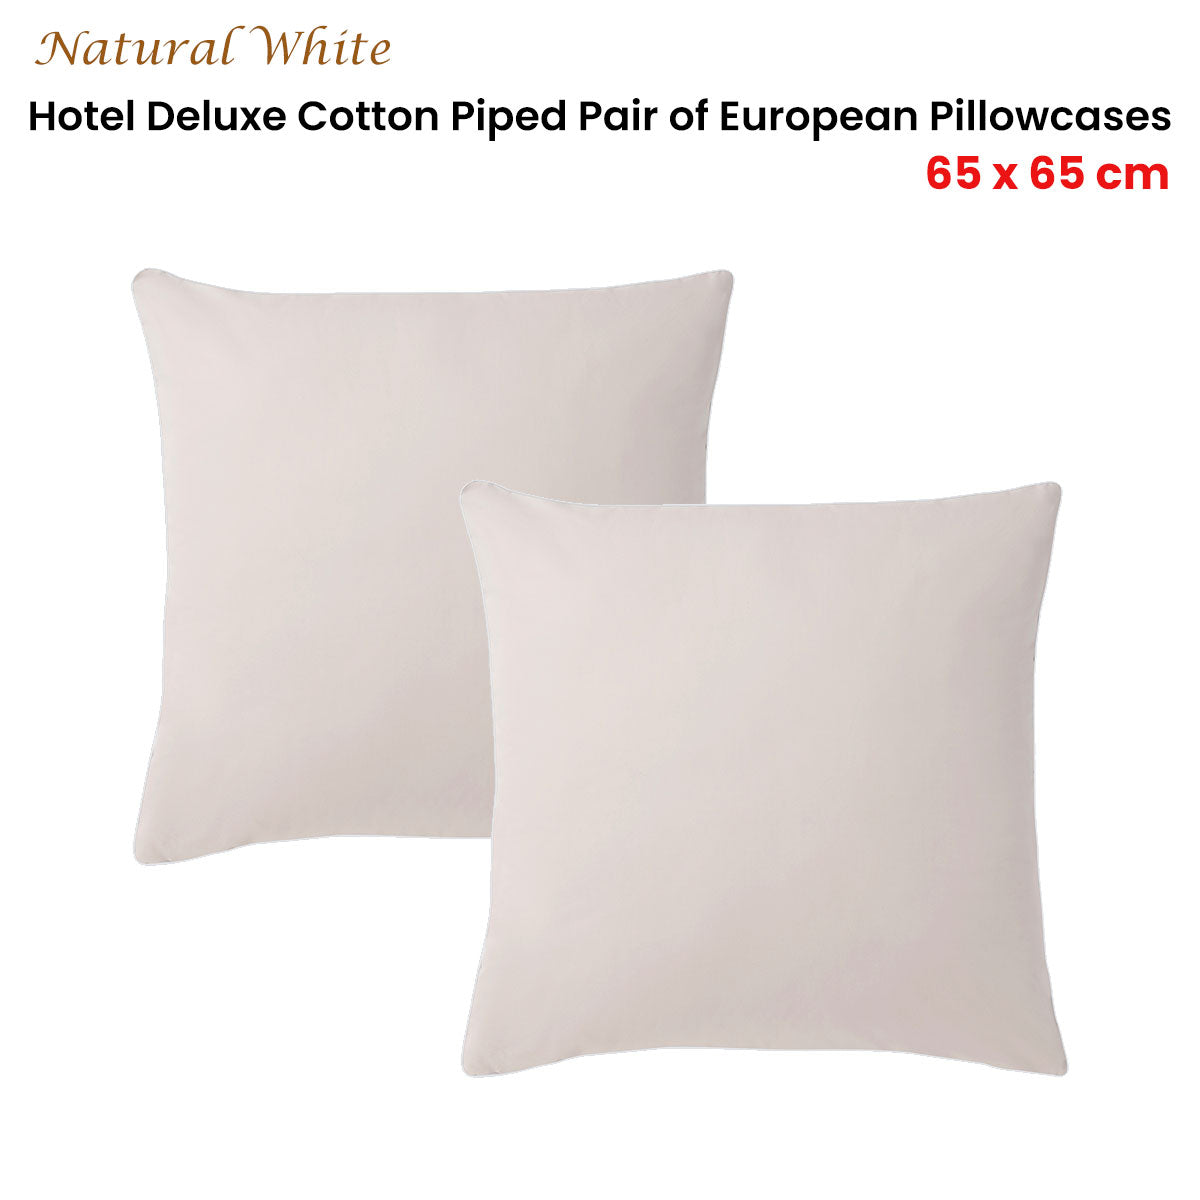 Accessorize Pair of  White/Natural Piped Hotel Deluxe Cotton European Pillowcases